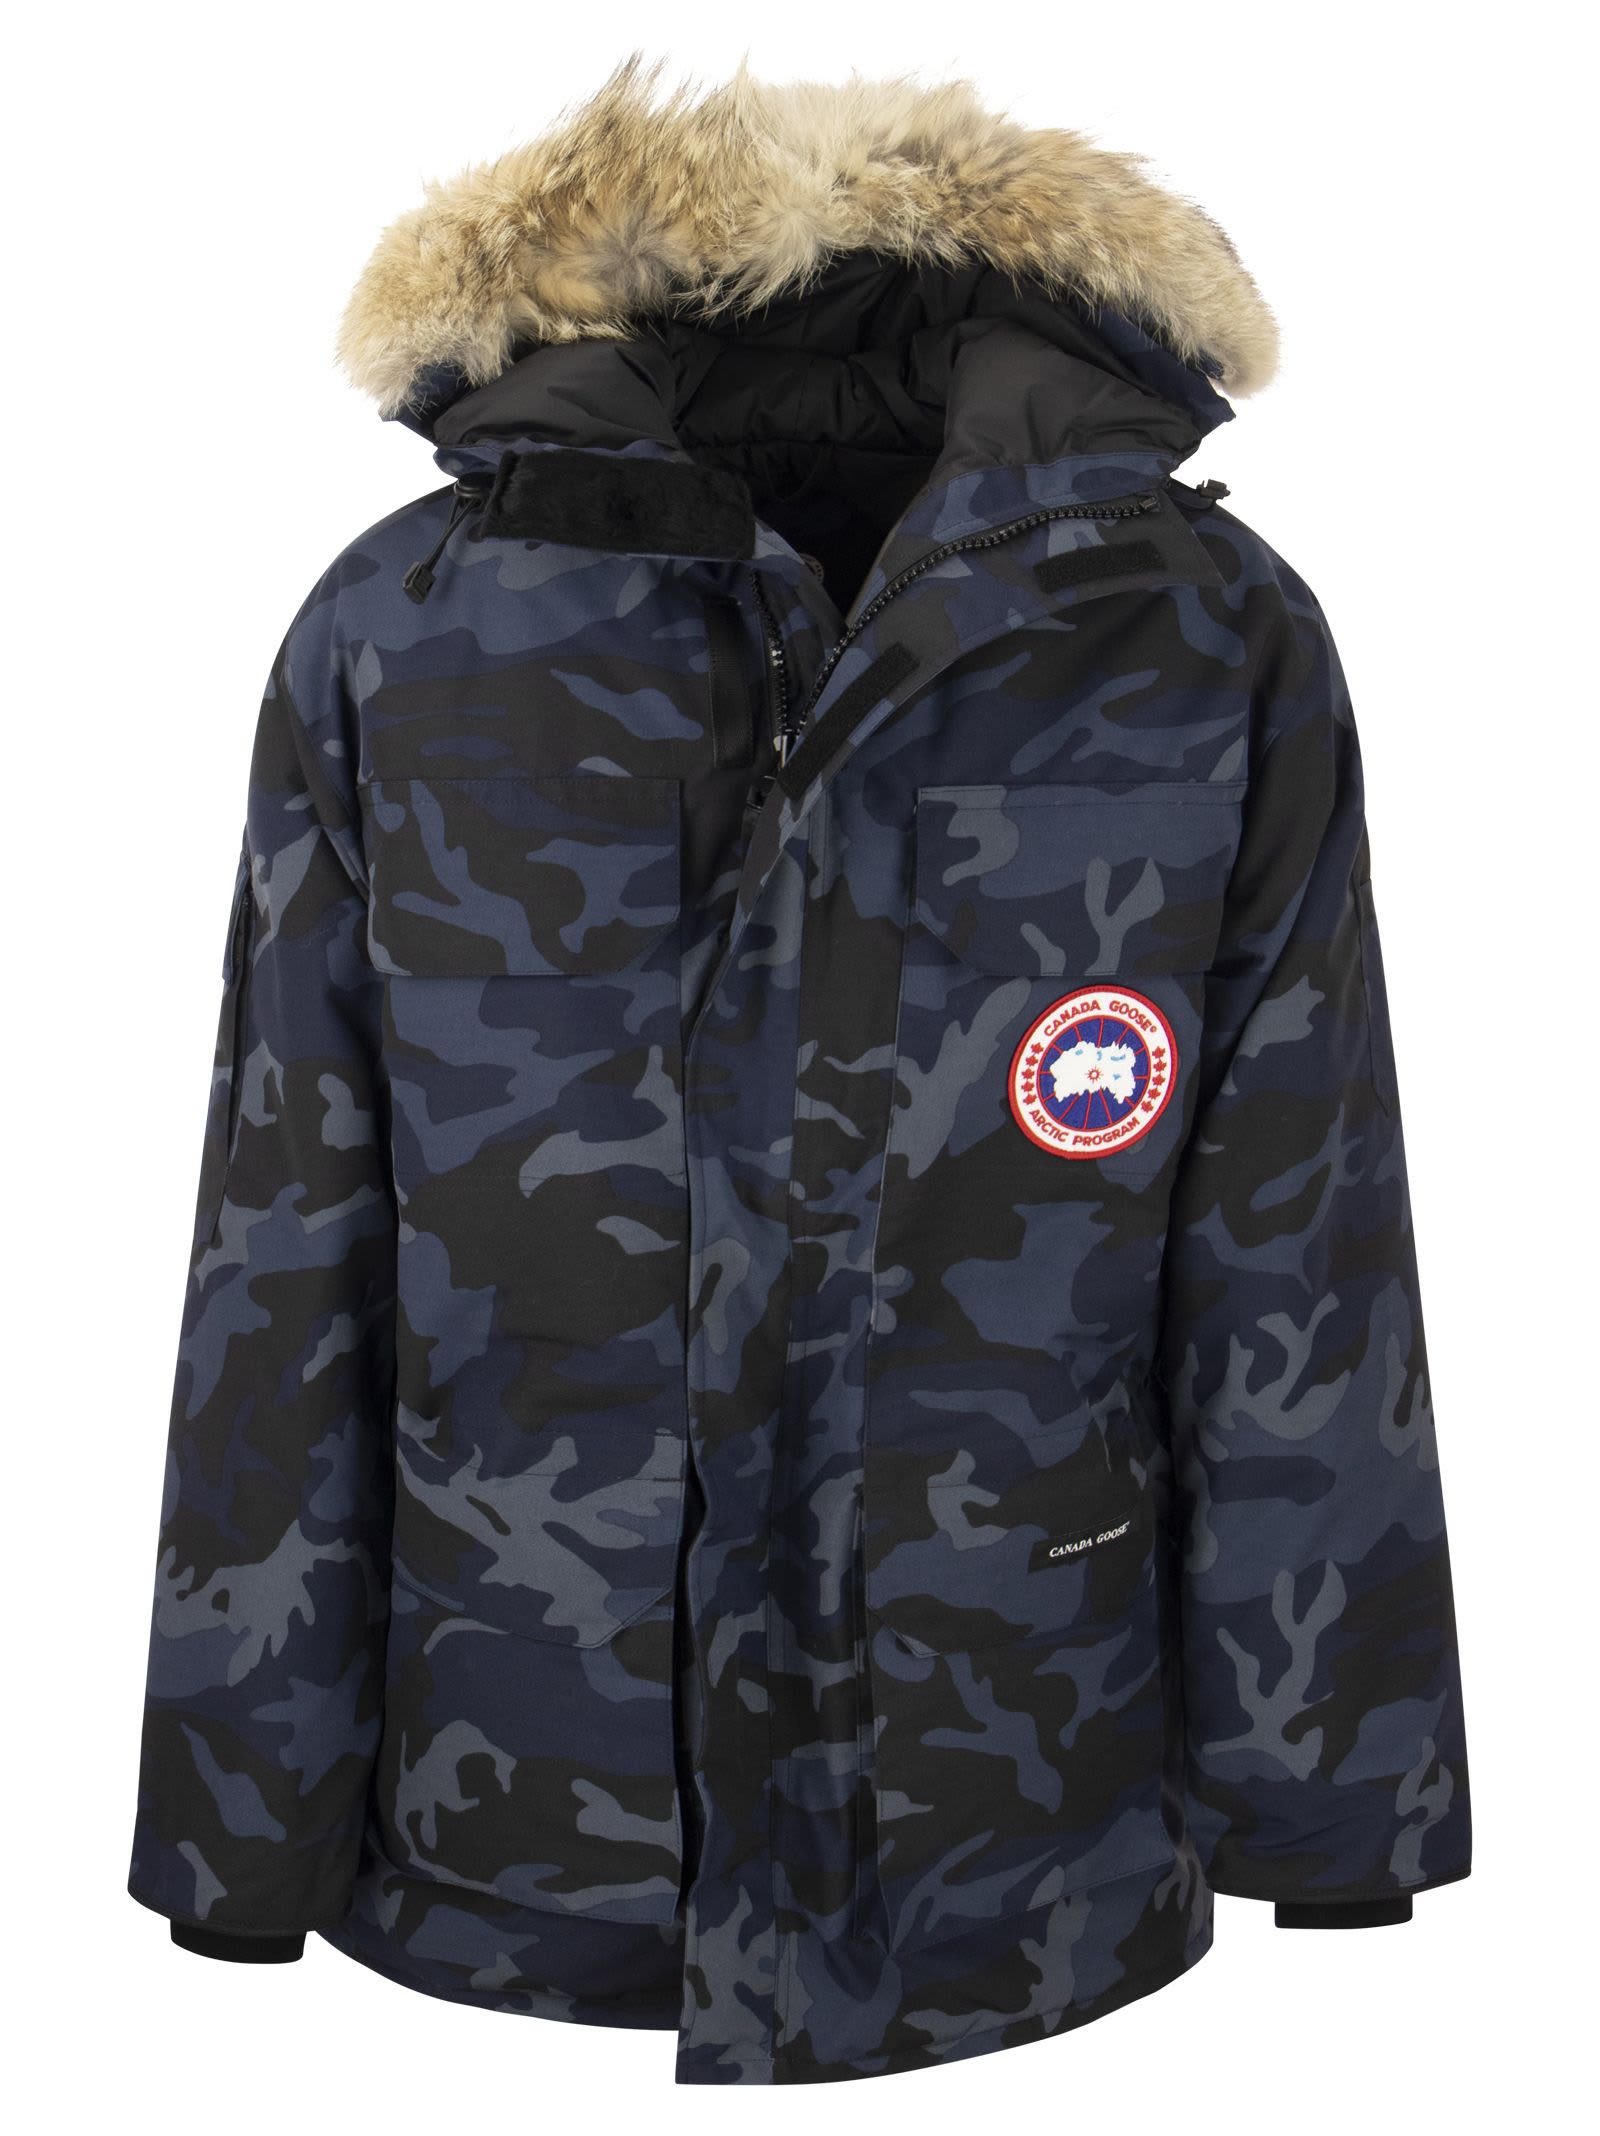 Canada Goose Expedition - Parka Camouflage